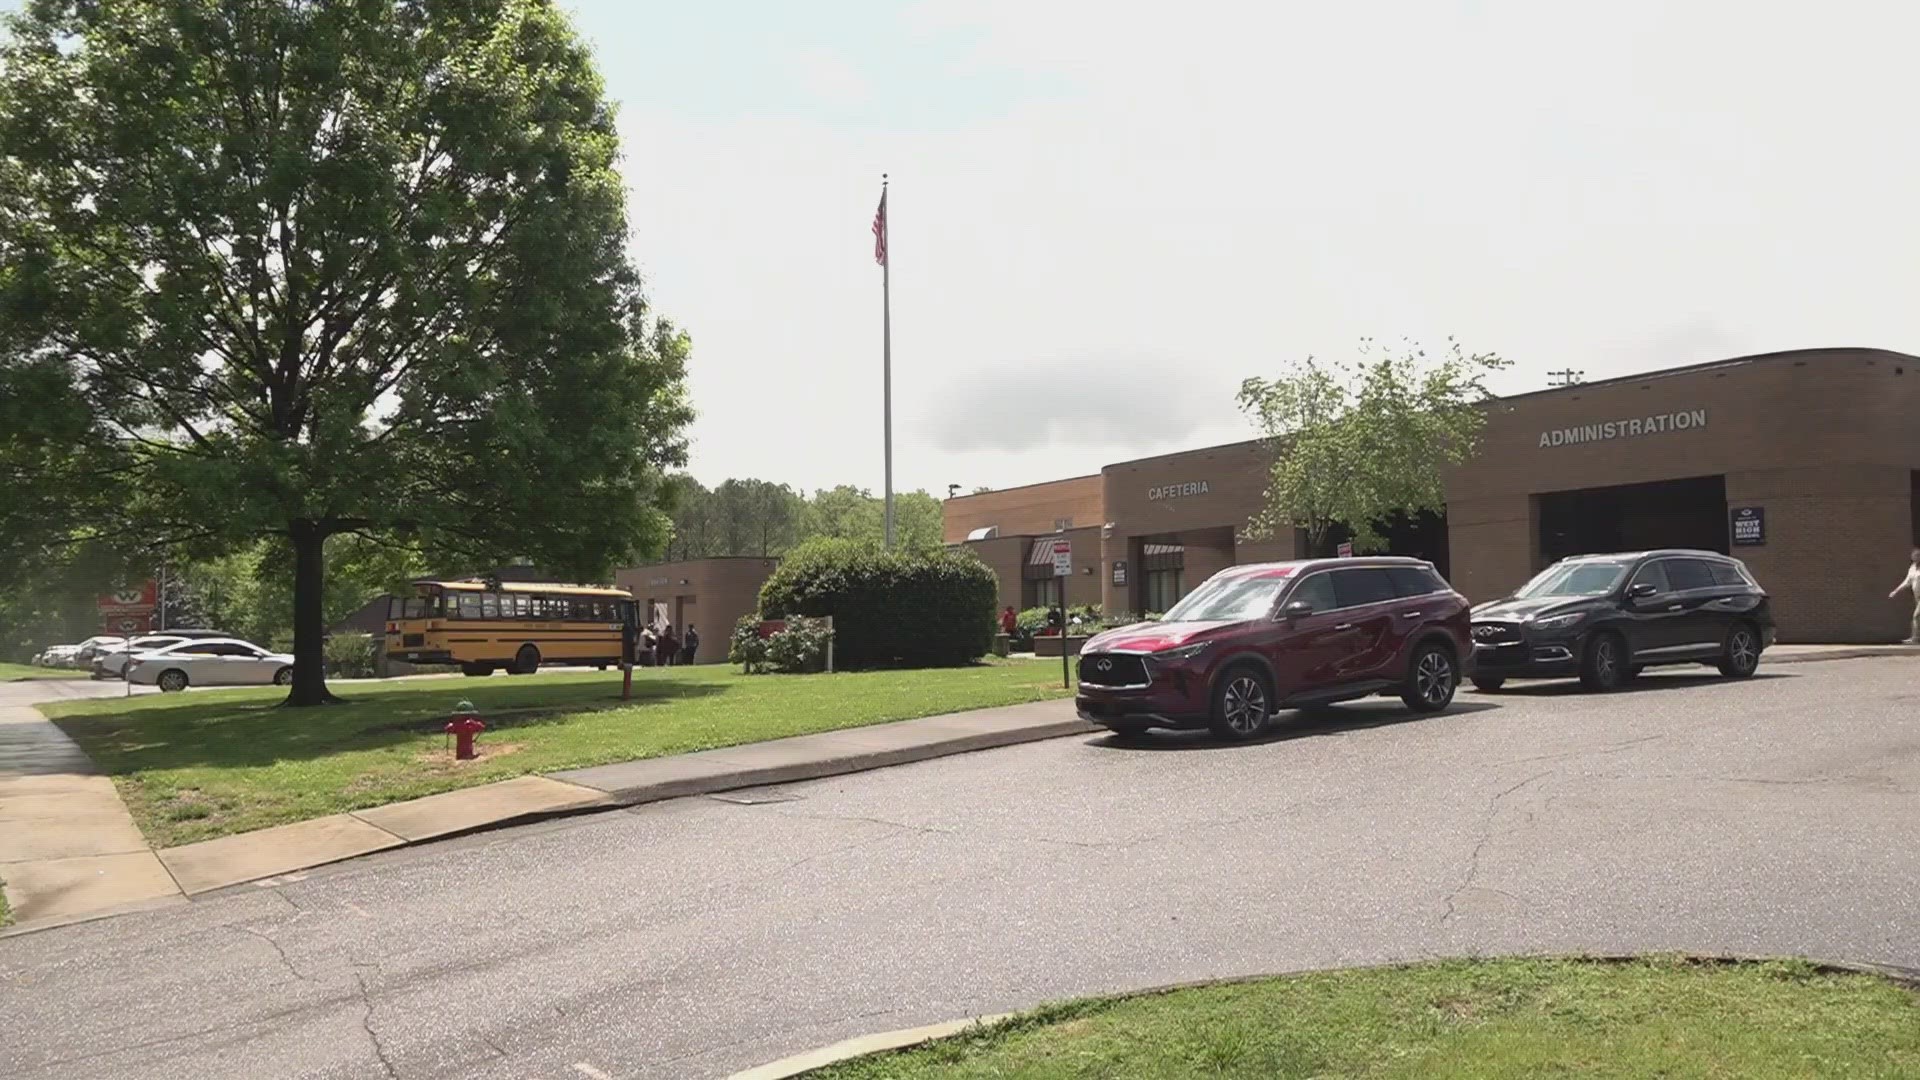 KPD said a gun went off in a student's backpack, saying the teacher's wound was "very minor."